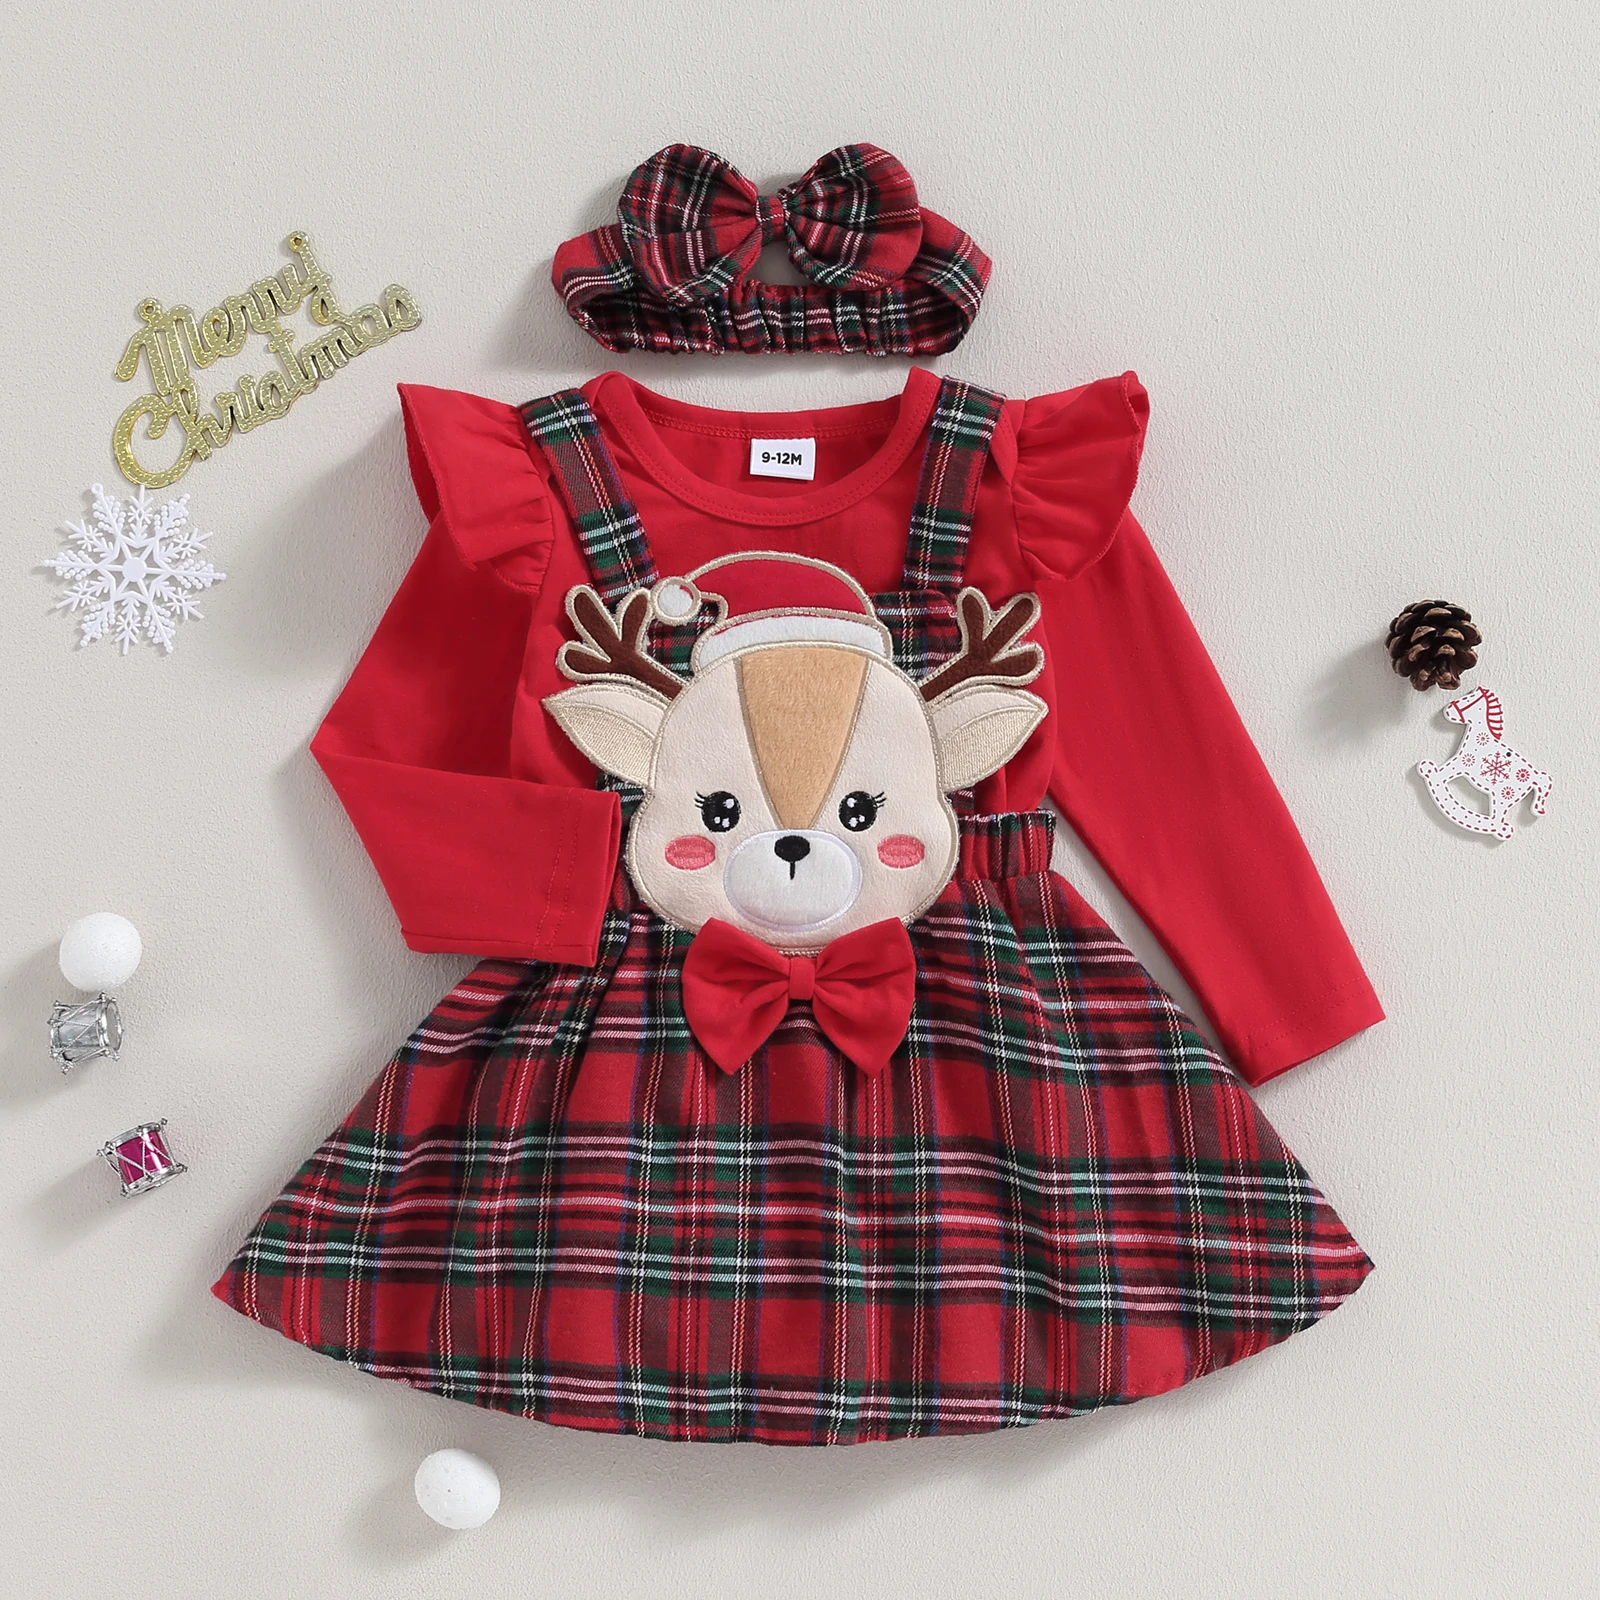 

0-18M Christmas Newborn Infant Baby Girl Clothes Sets Knit Red Romper Deer Plaid Skirts Headban Xmas Outfits Costume